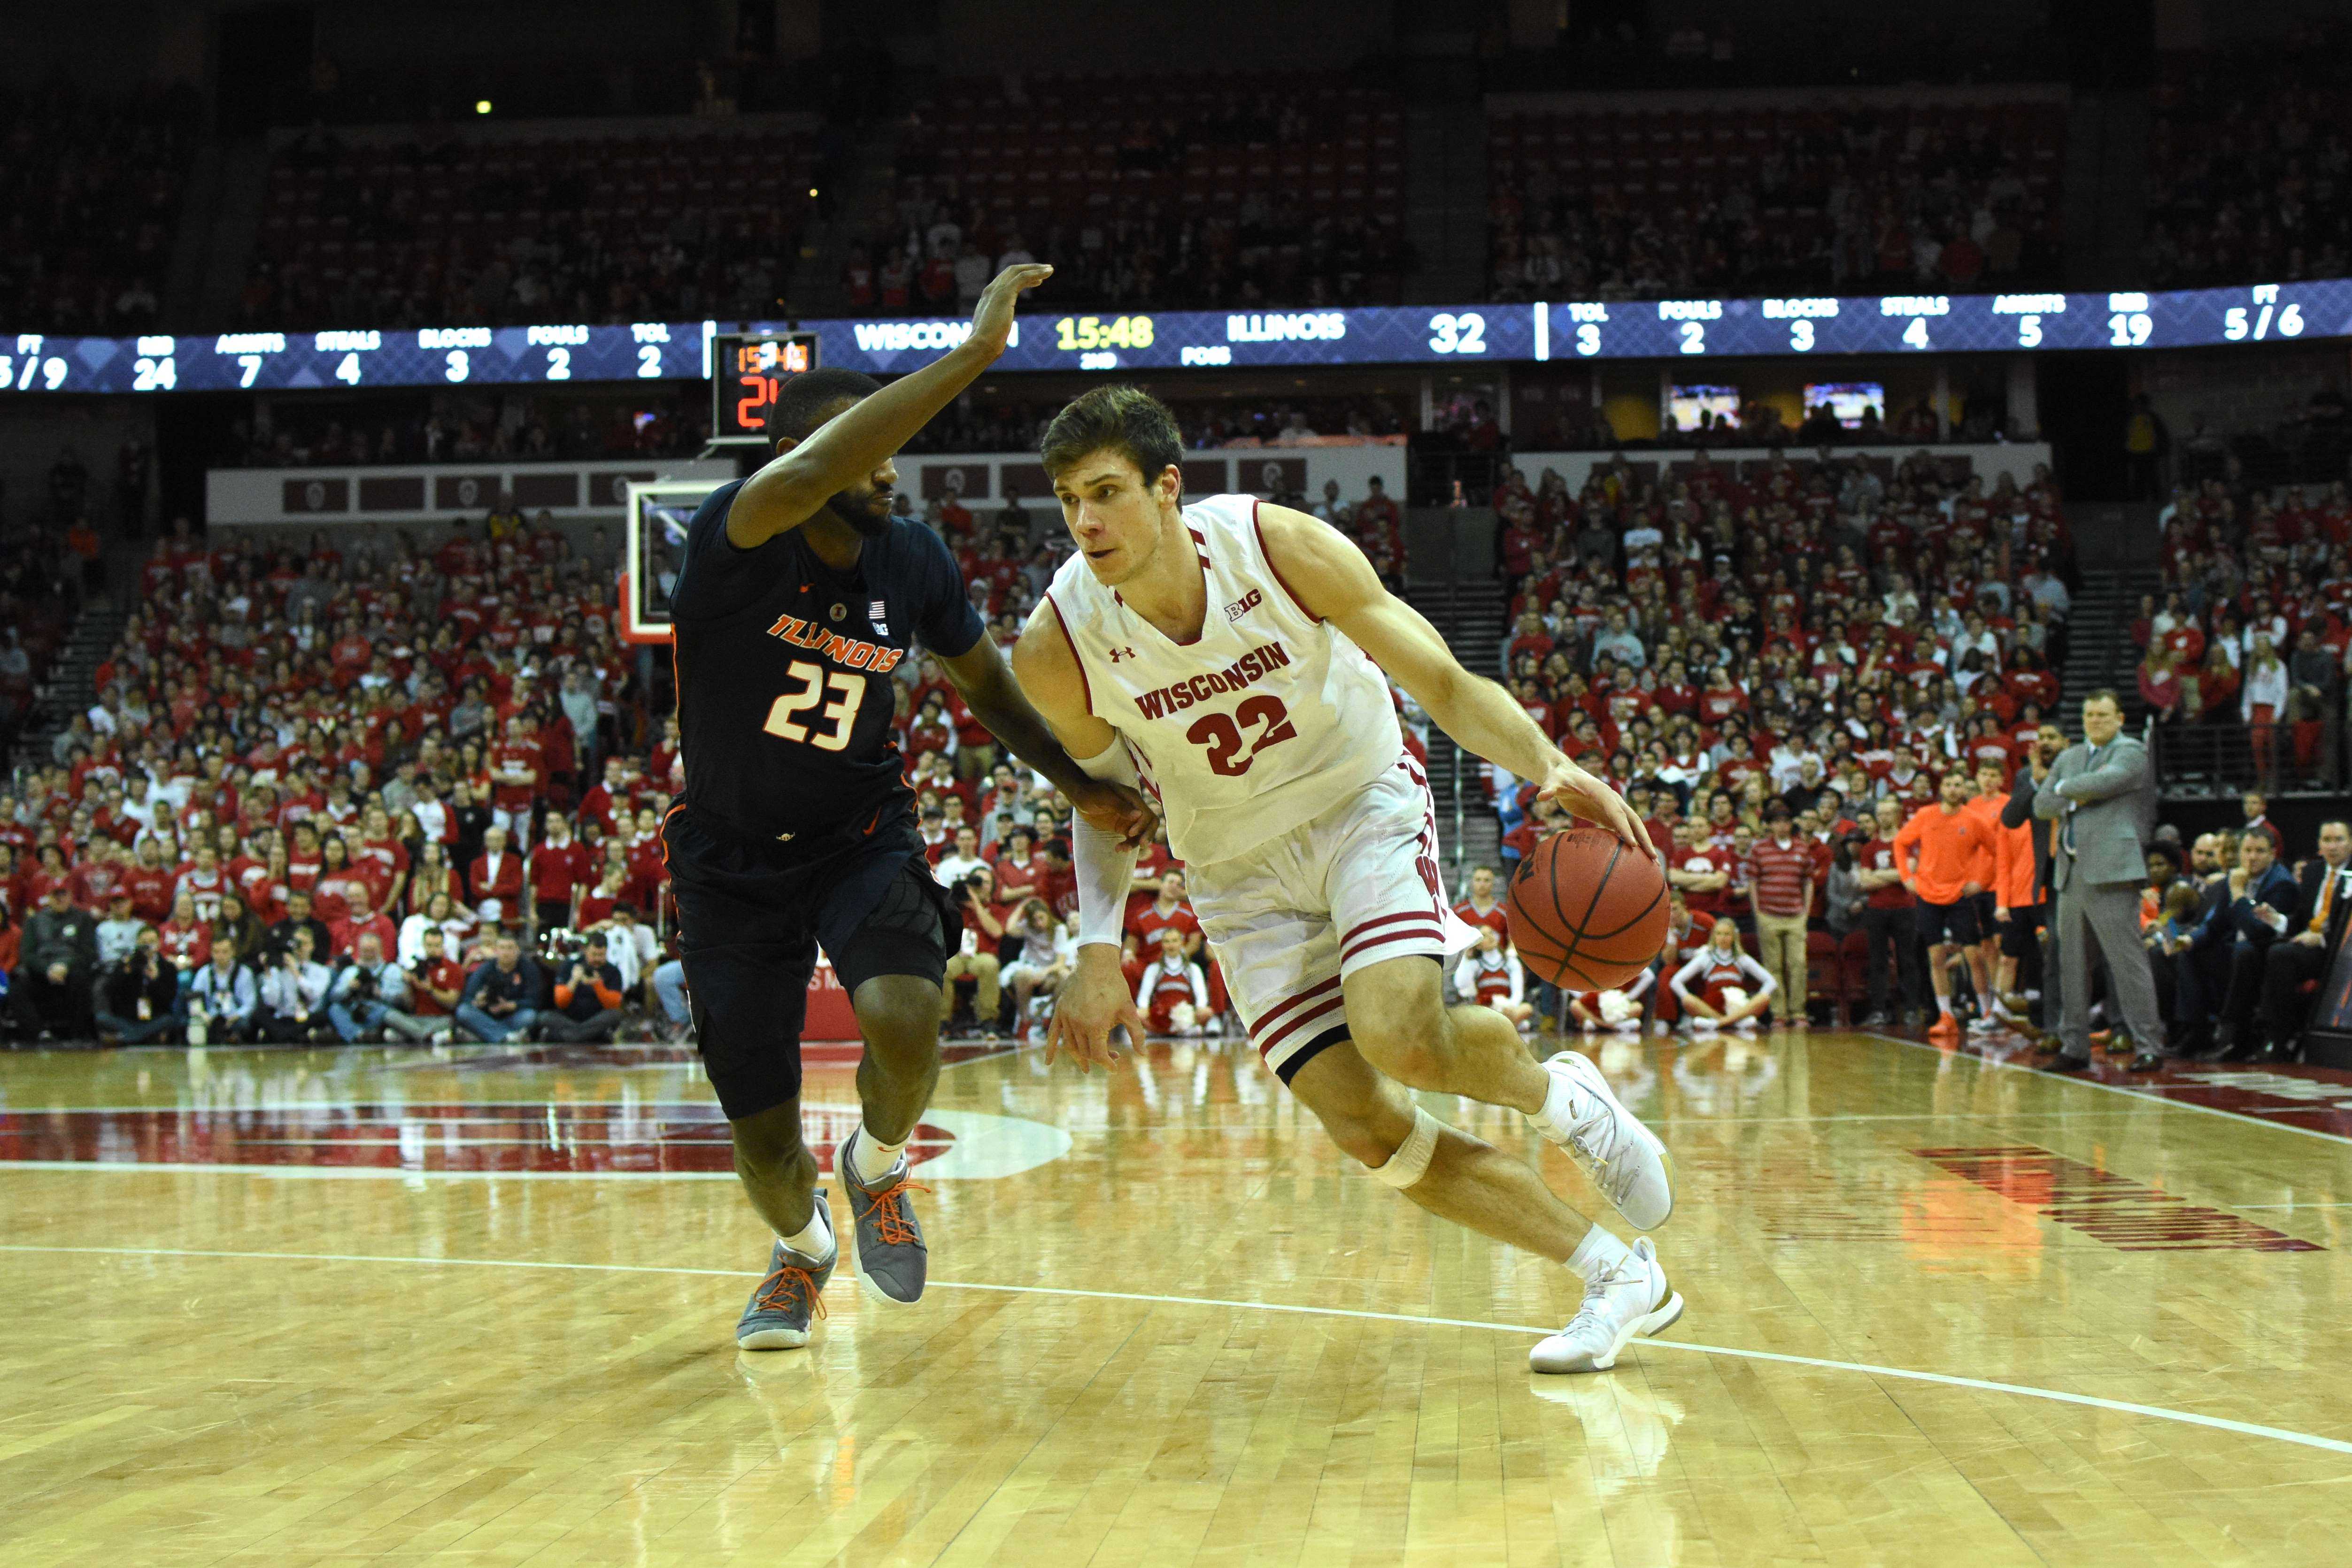 Mens basketball As Badgers wrap up season, Ethan Happs free throw woes could end up costing them · The Badger Herald